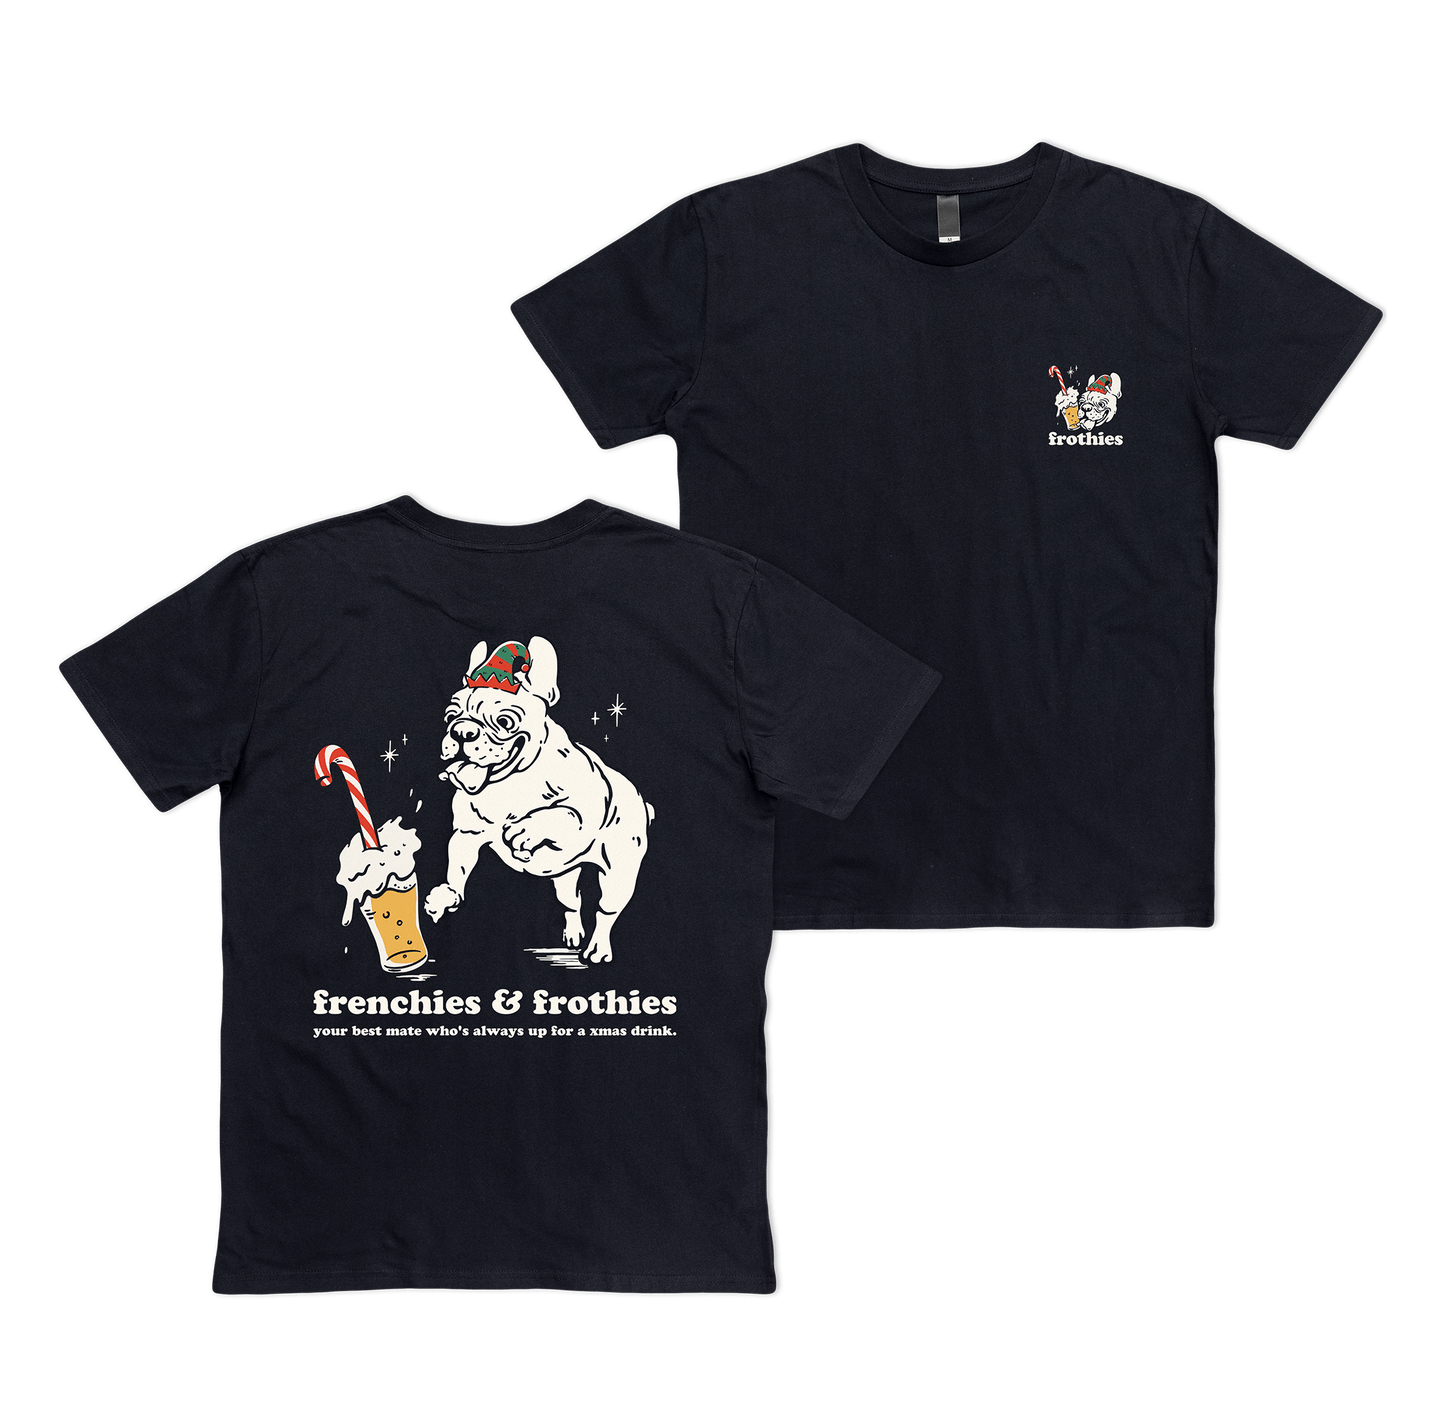 Xmas Frenchies & Frothies Tee T-Shirt Frothies